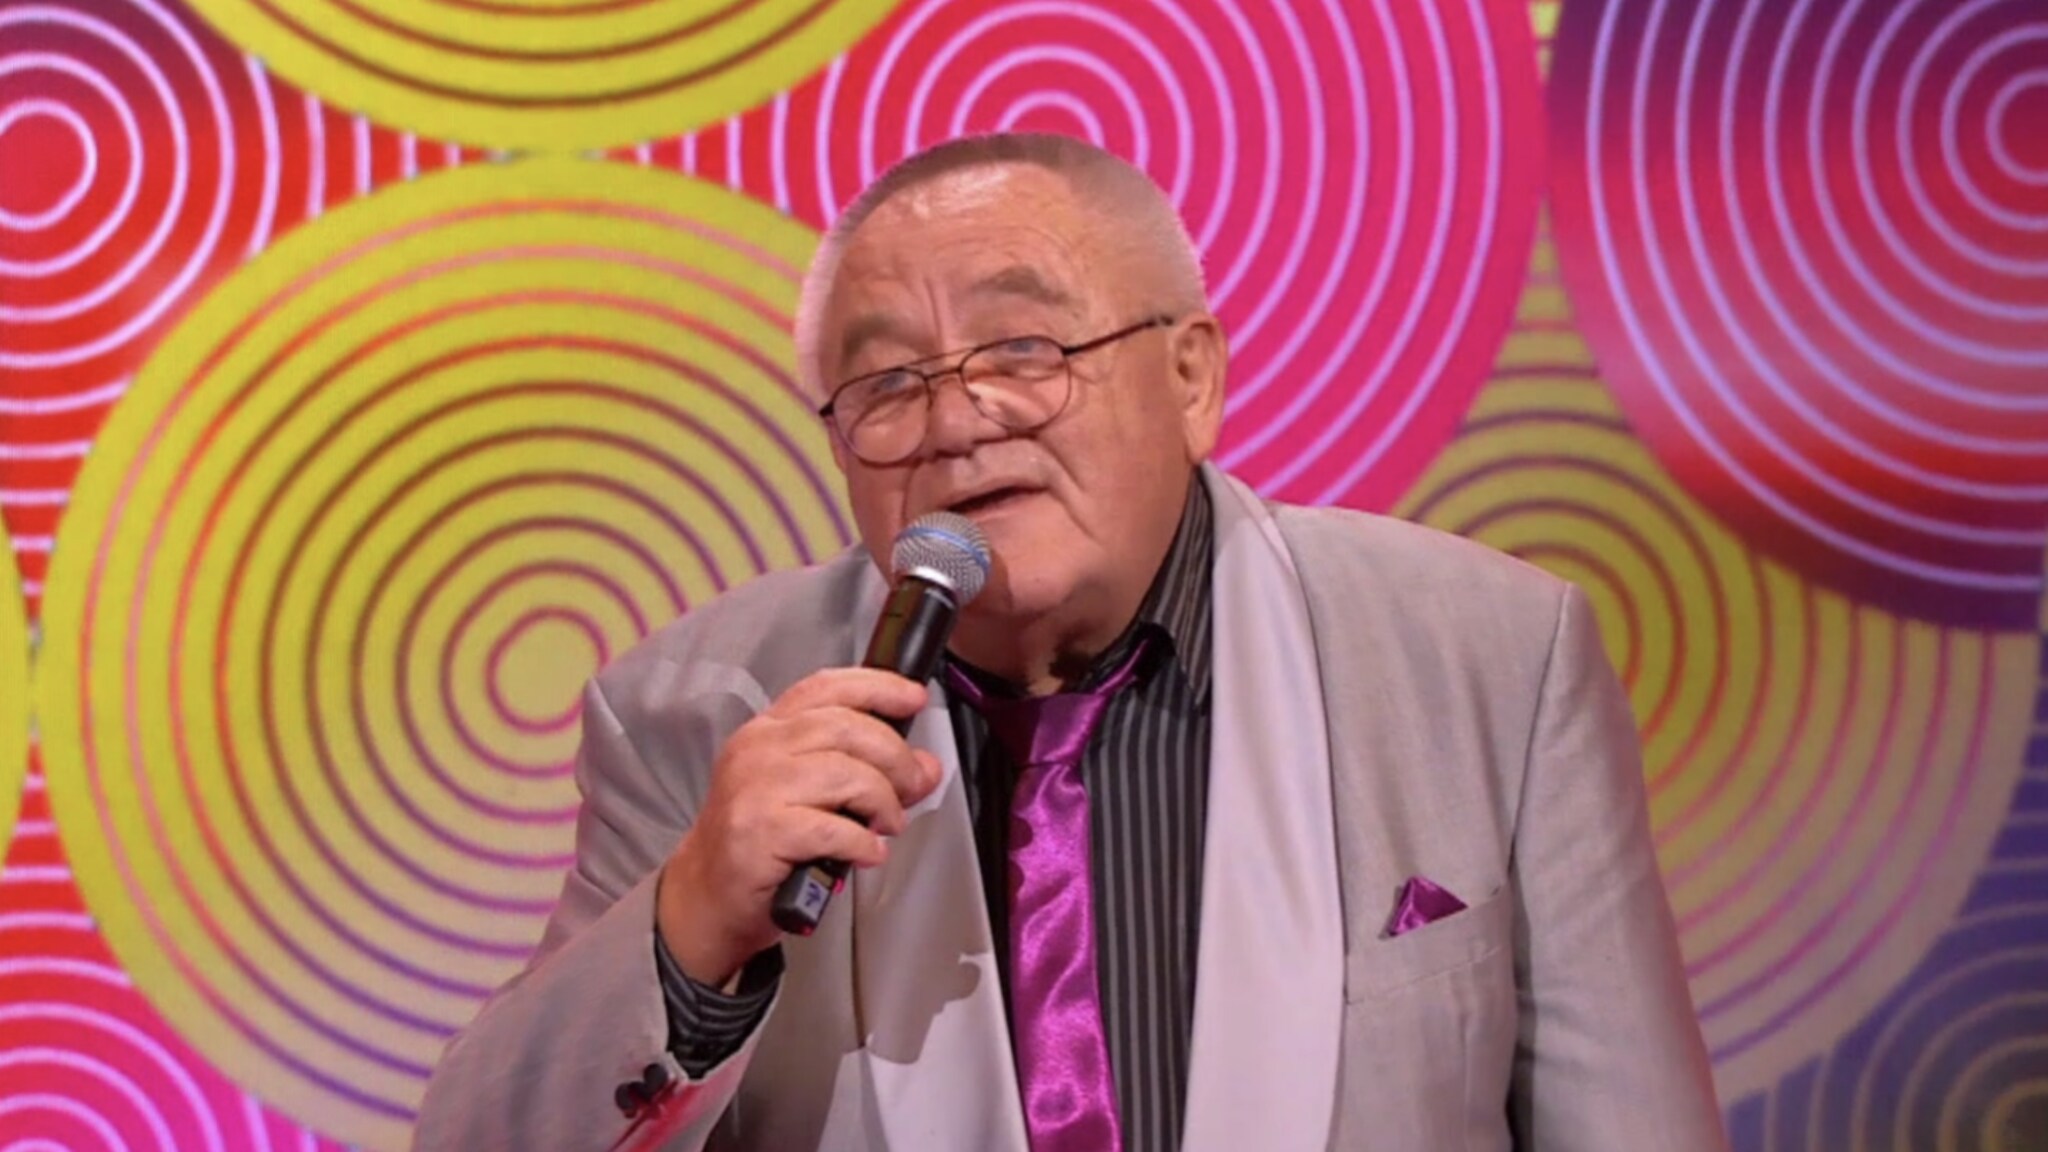 The 75-year-old Hans is delighted with his voice in I Can See Your Voice